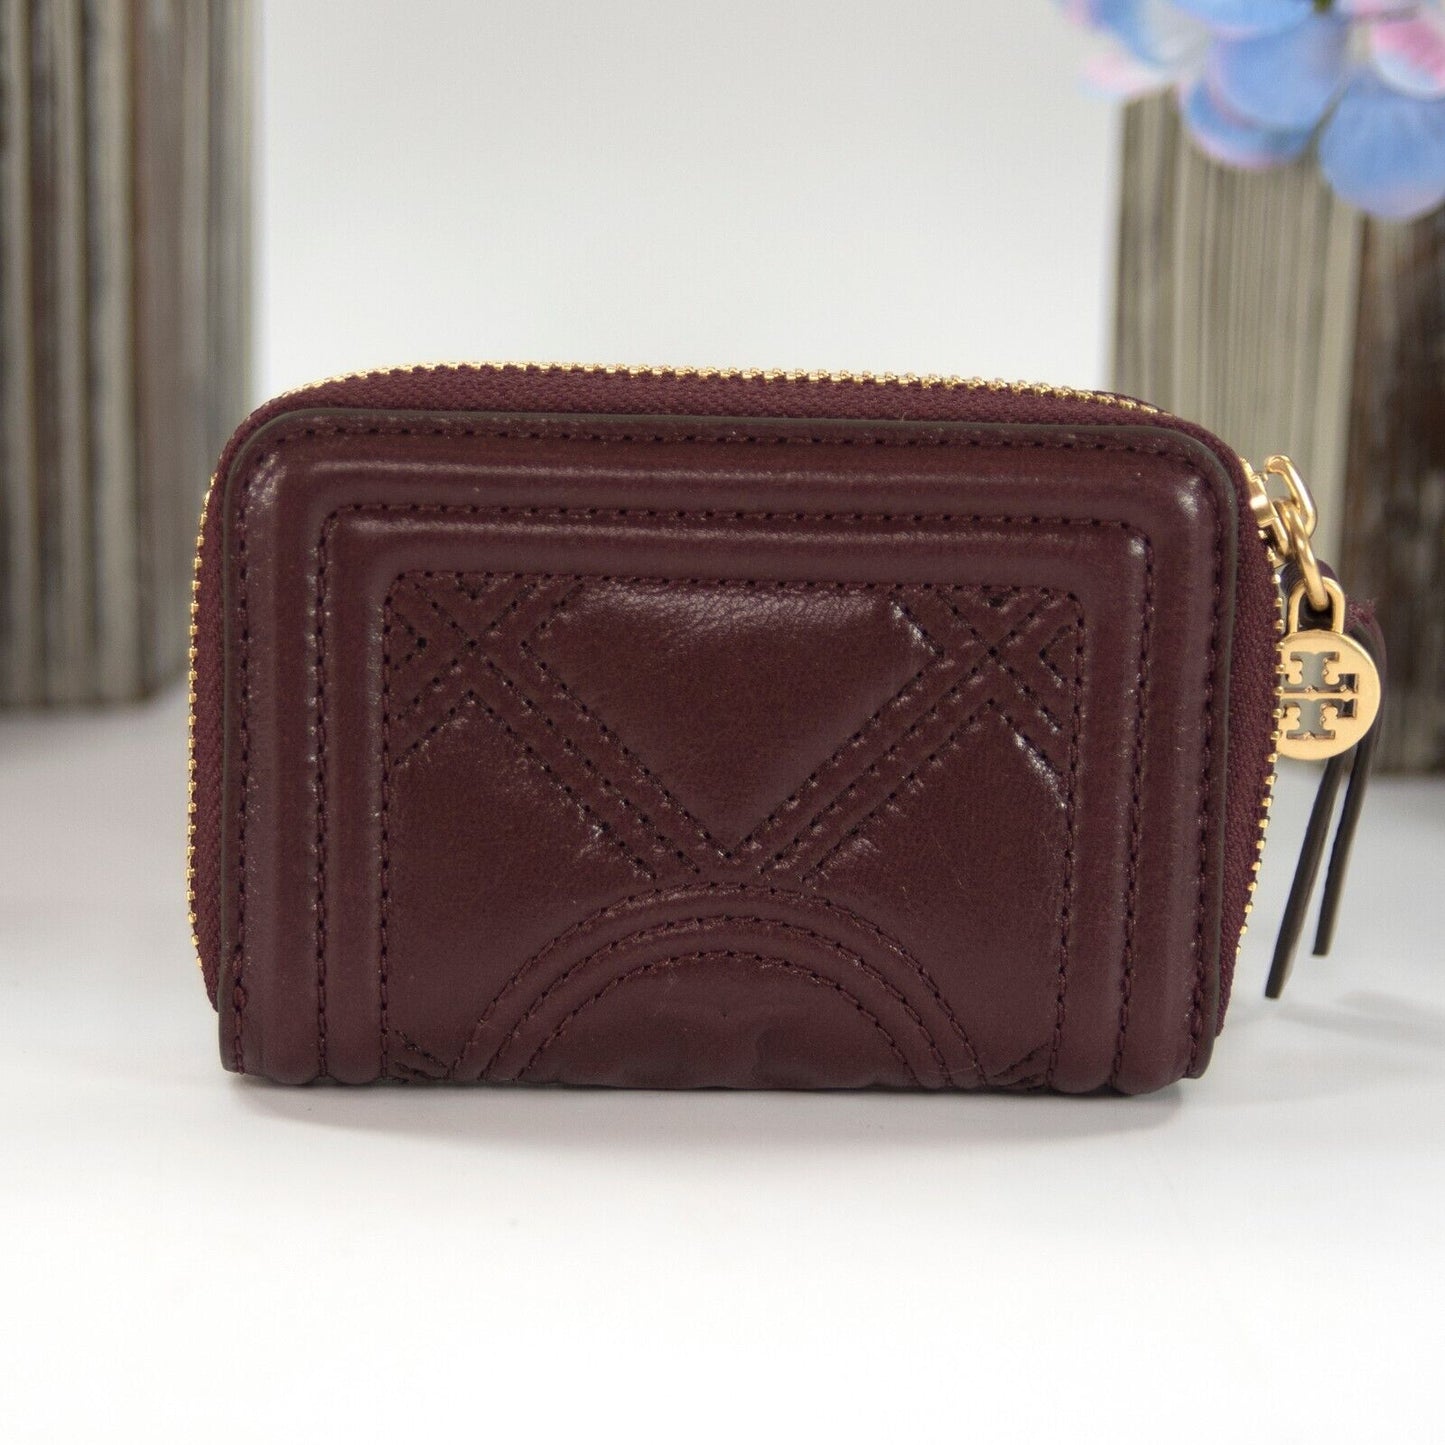 Tory Burch Nebbiolo Soft Waxed Leather Mini Compact Zip Around Wallet NWT